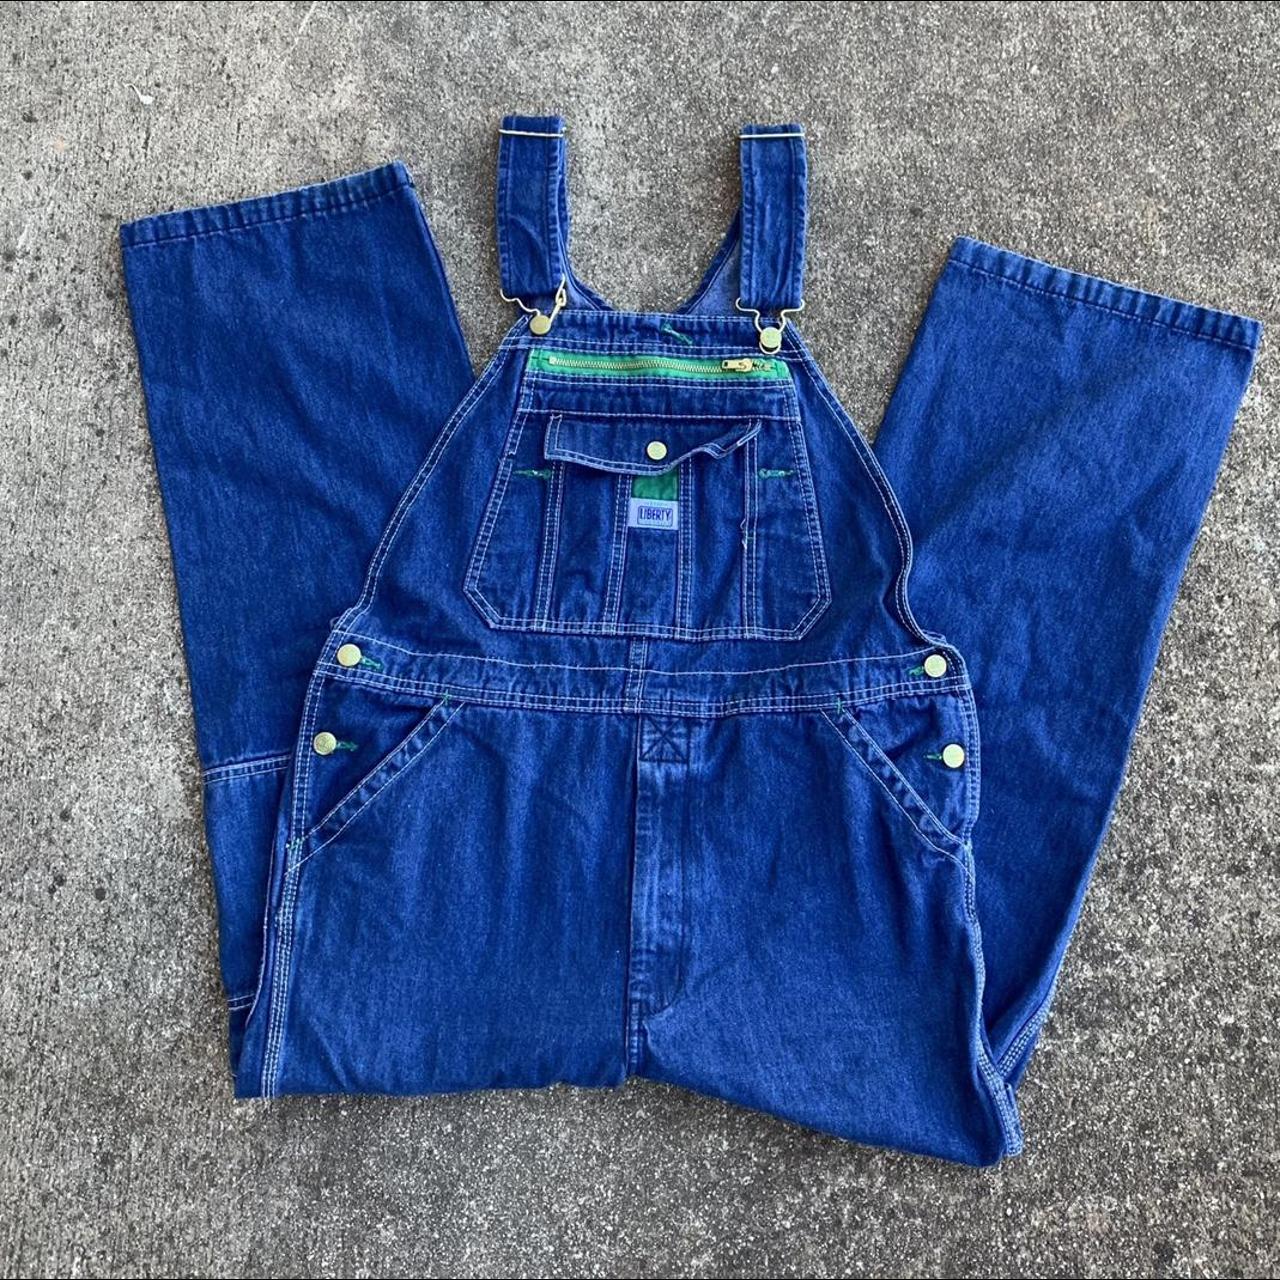 Product Image 1 - Vintage Liberty Overalls 
#libertyoveralls #overalls